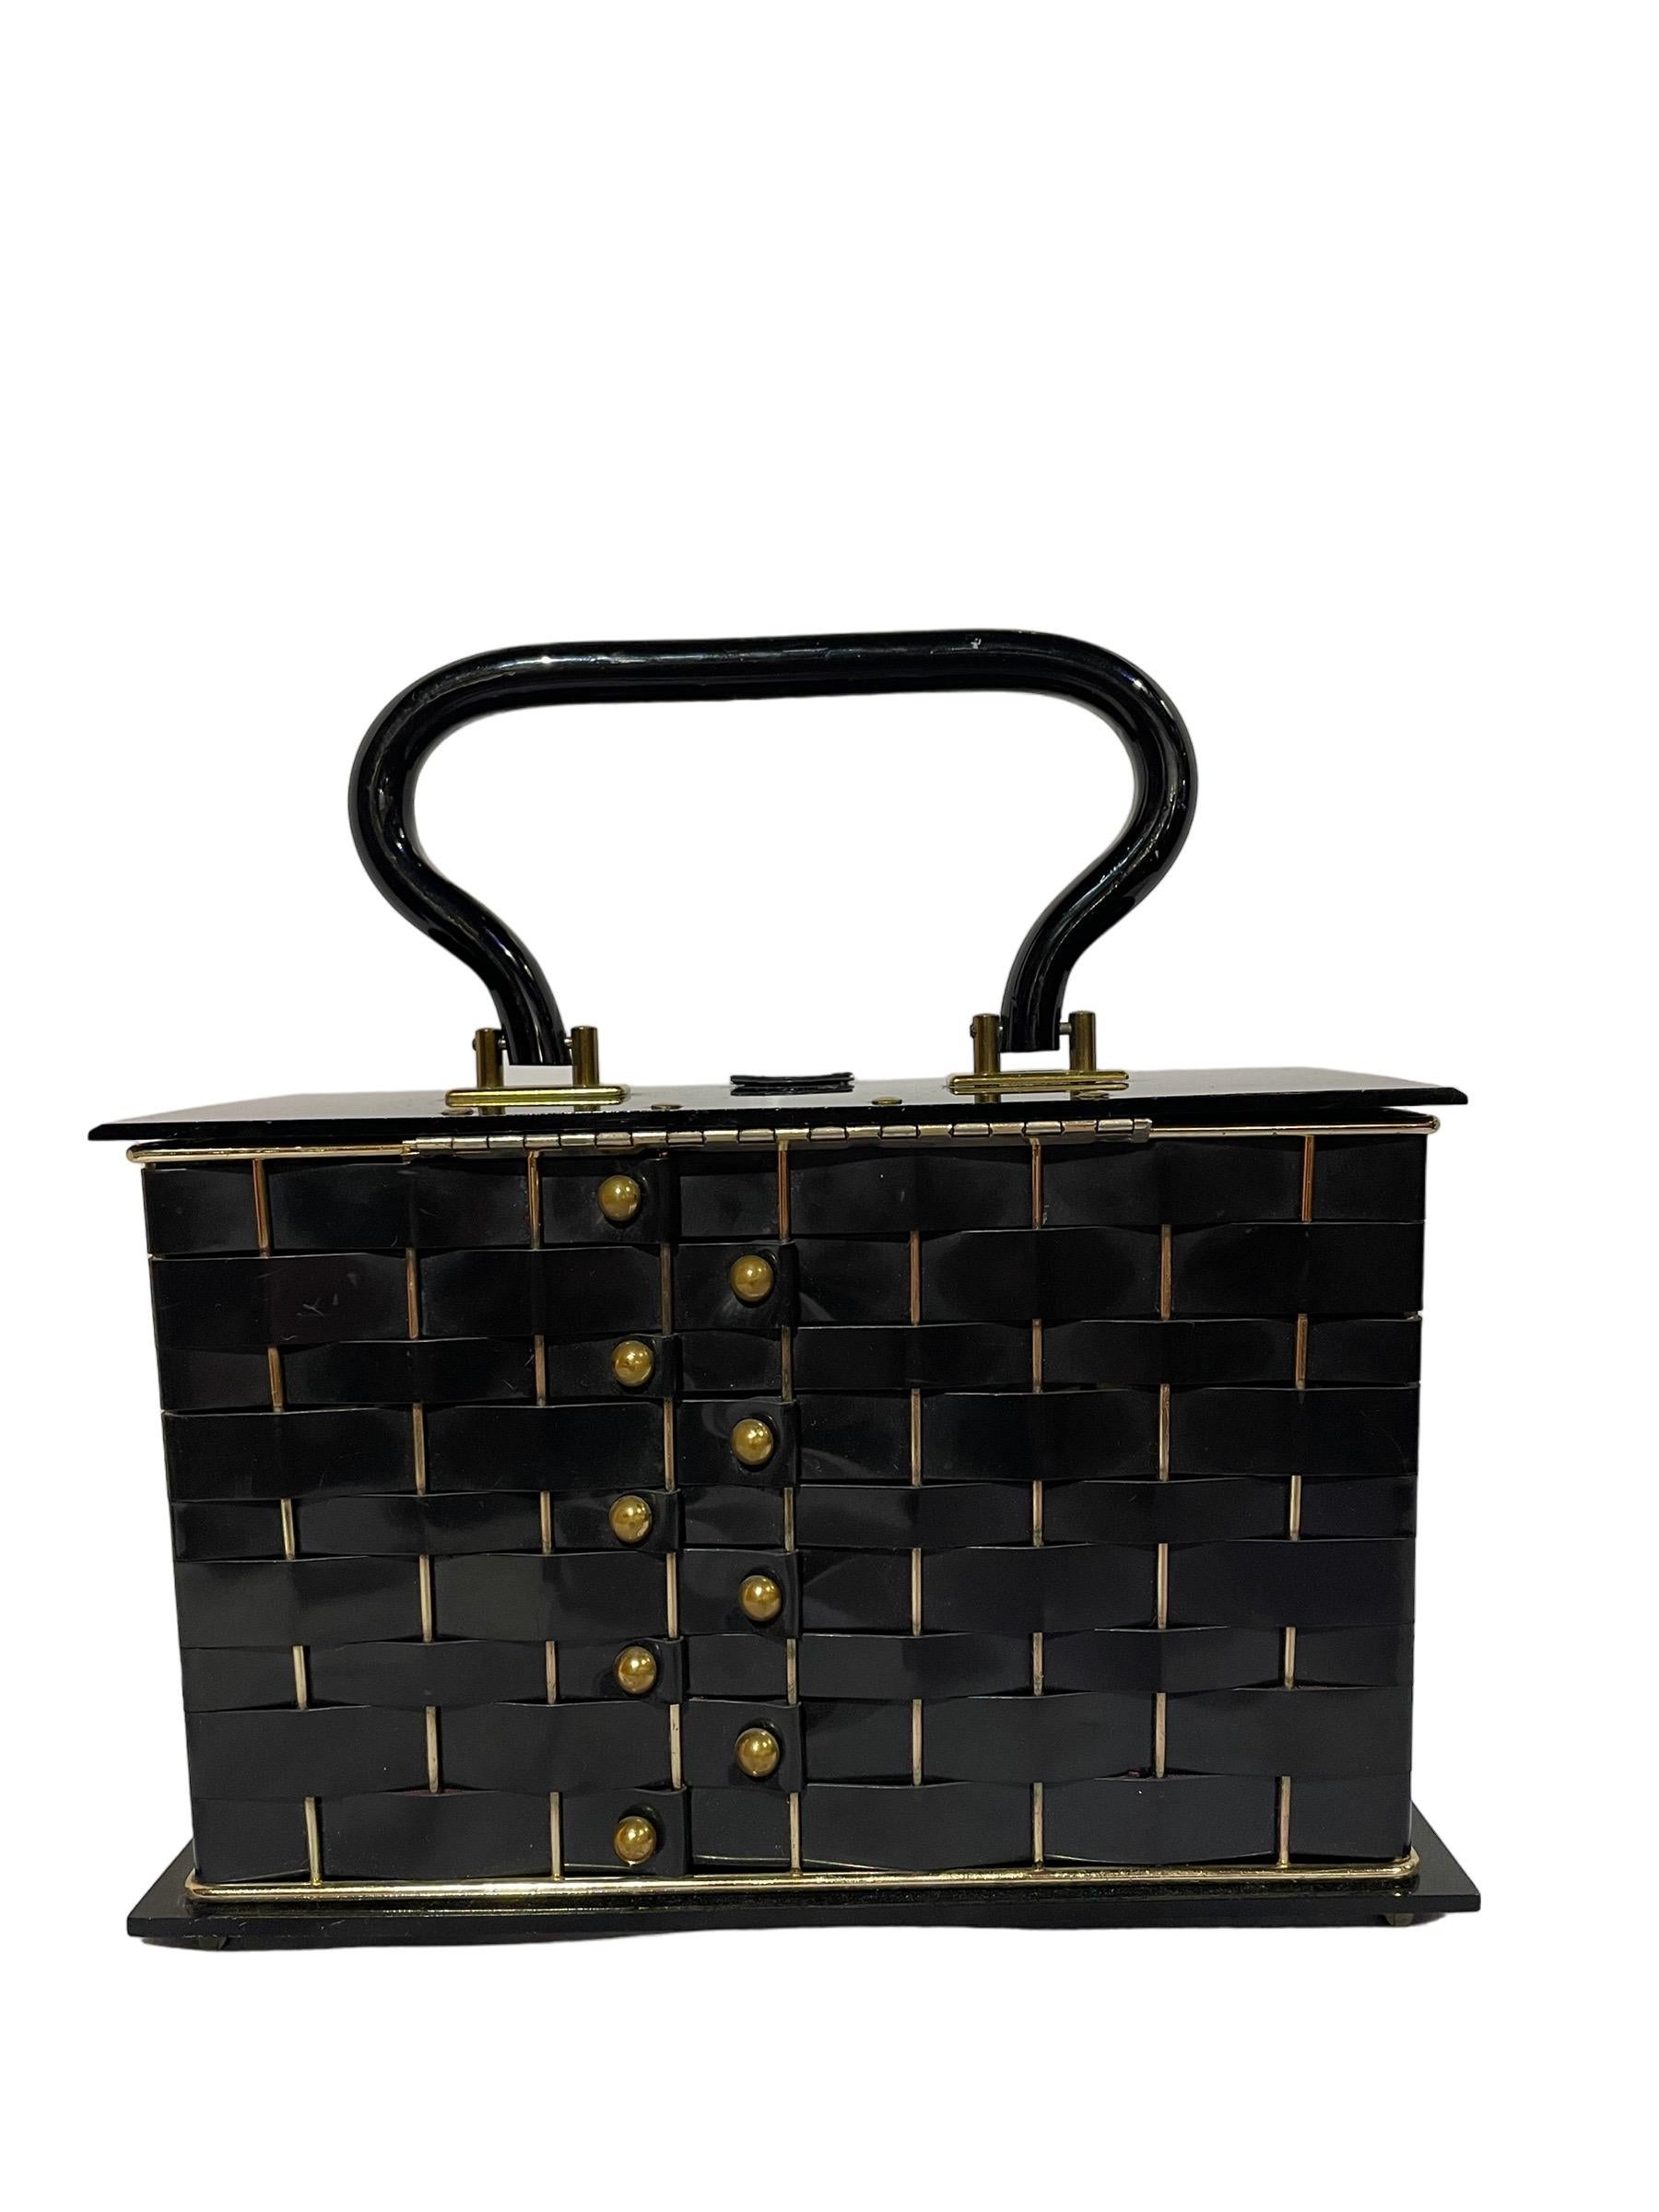 1950s Black Lucite and Metal Woven Handbag by Dorset Rex  In Good Condition For Sale In Greenport, NY